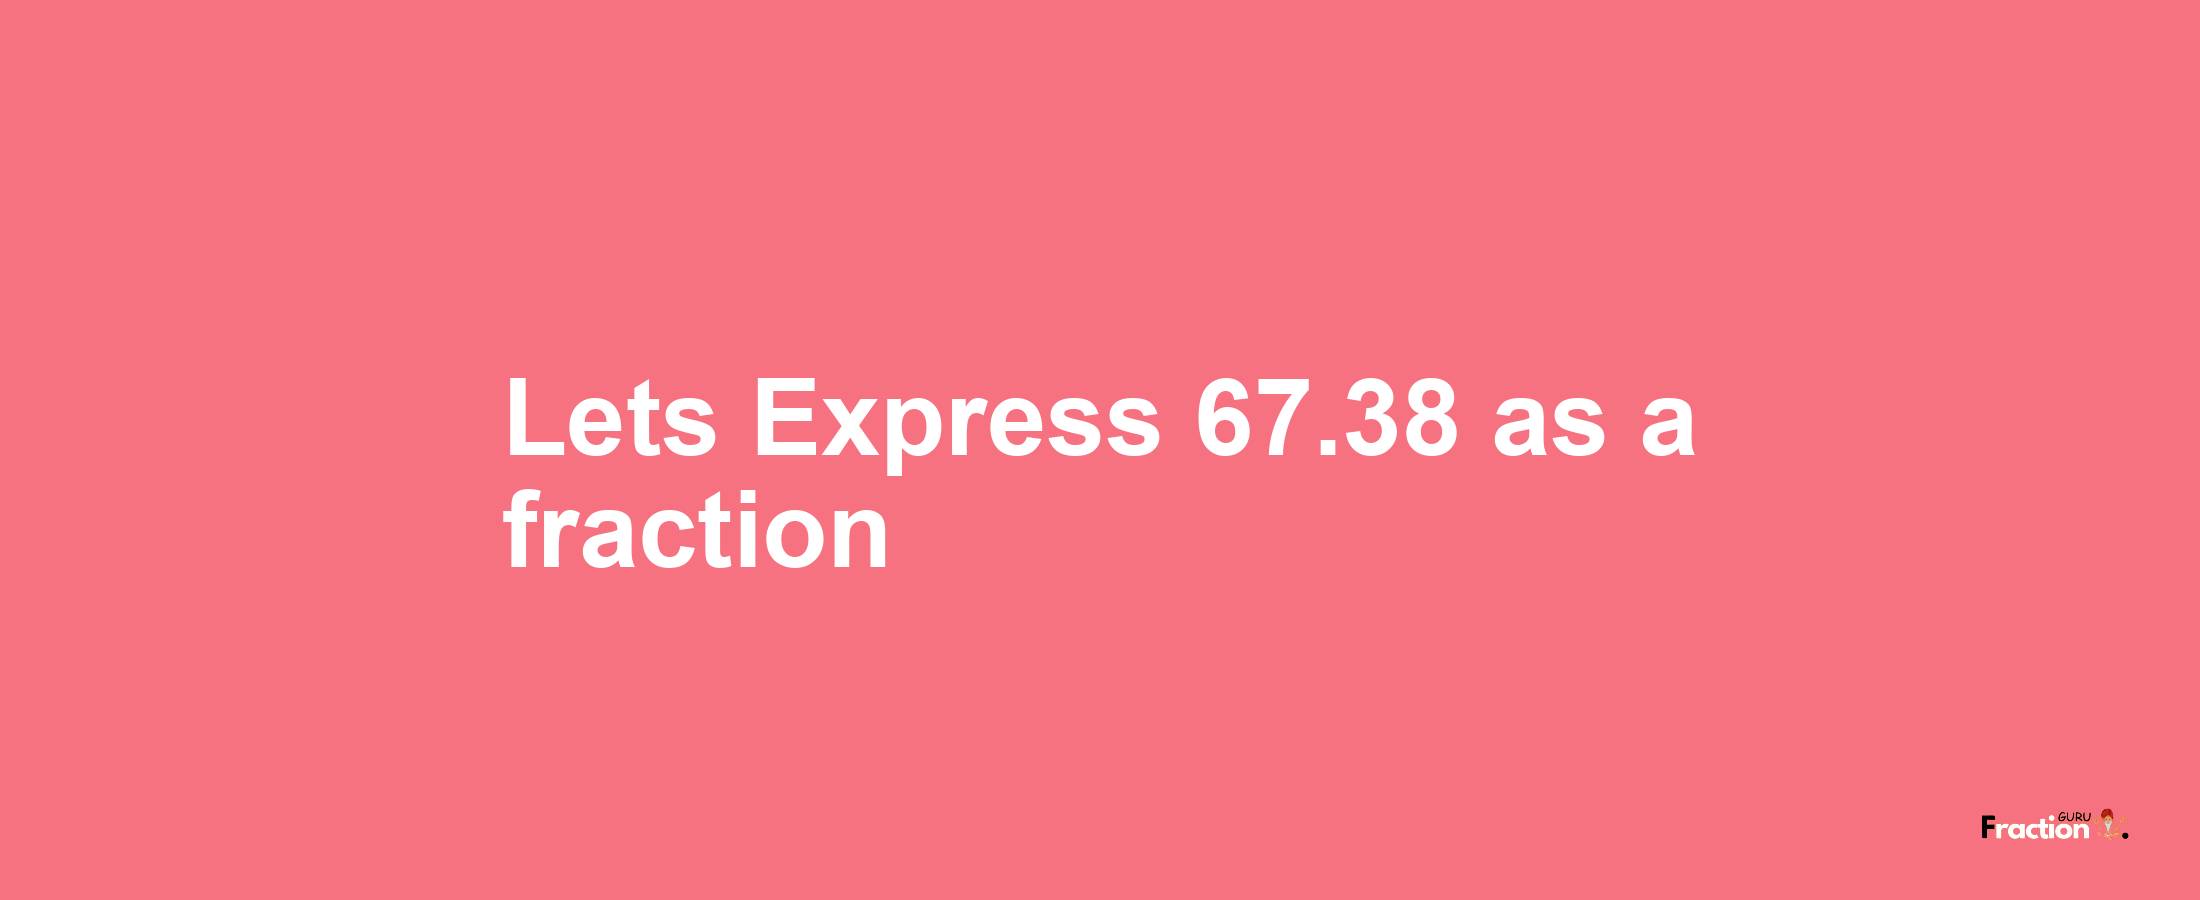 Lets Express 67.38 as afraction